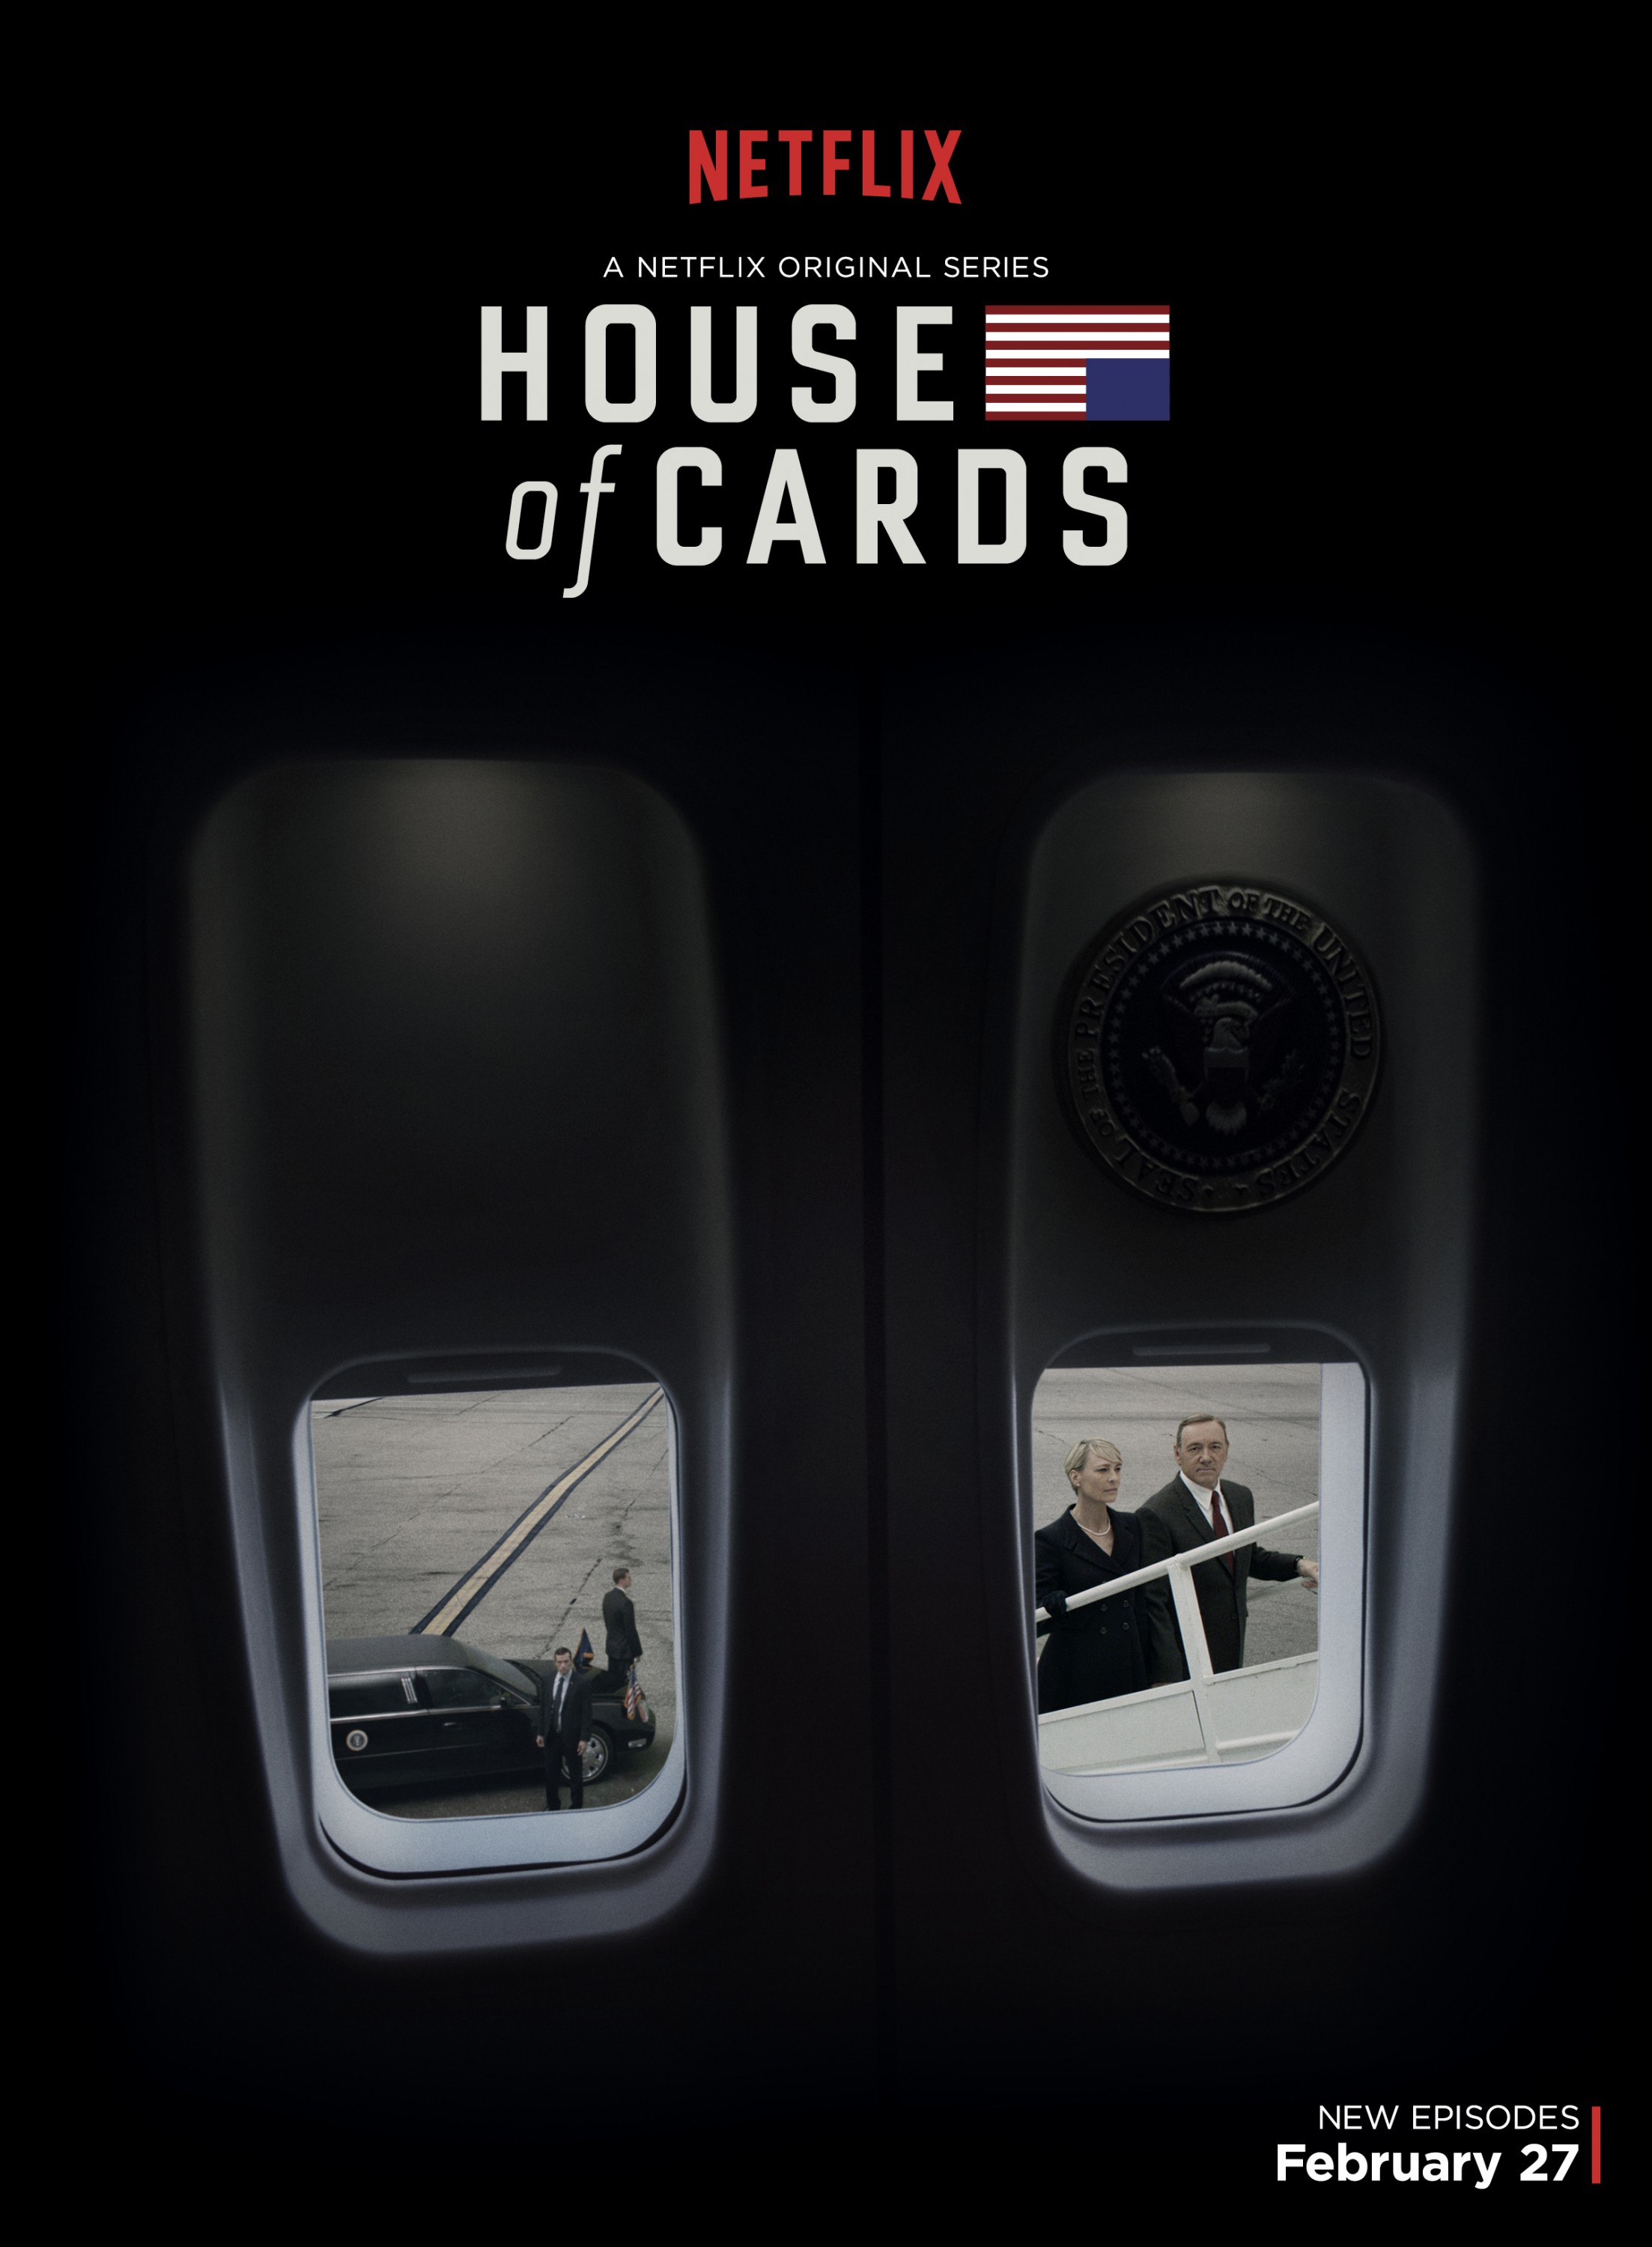 Mega Sized TV Poster Image for House of Cards (#7 of 10)